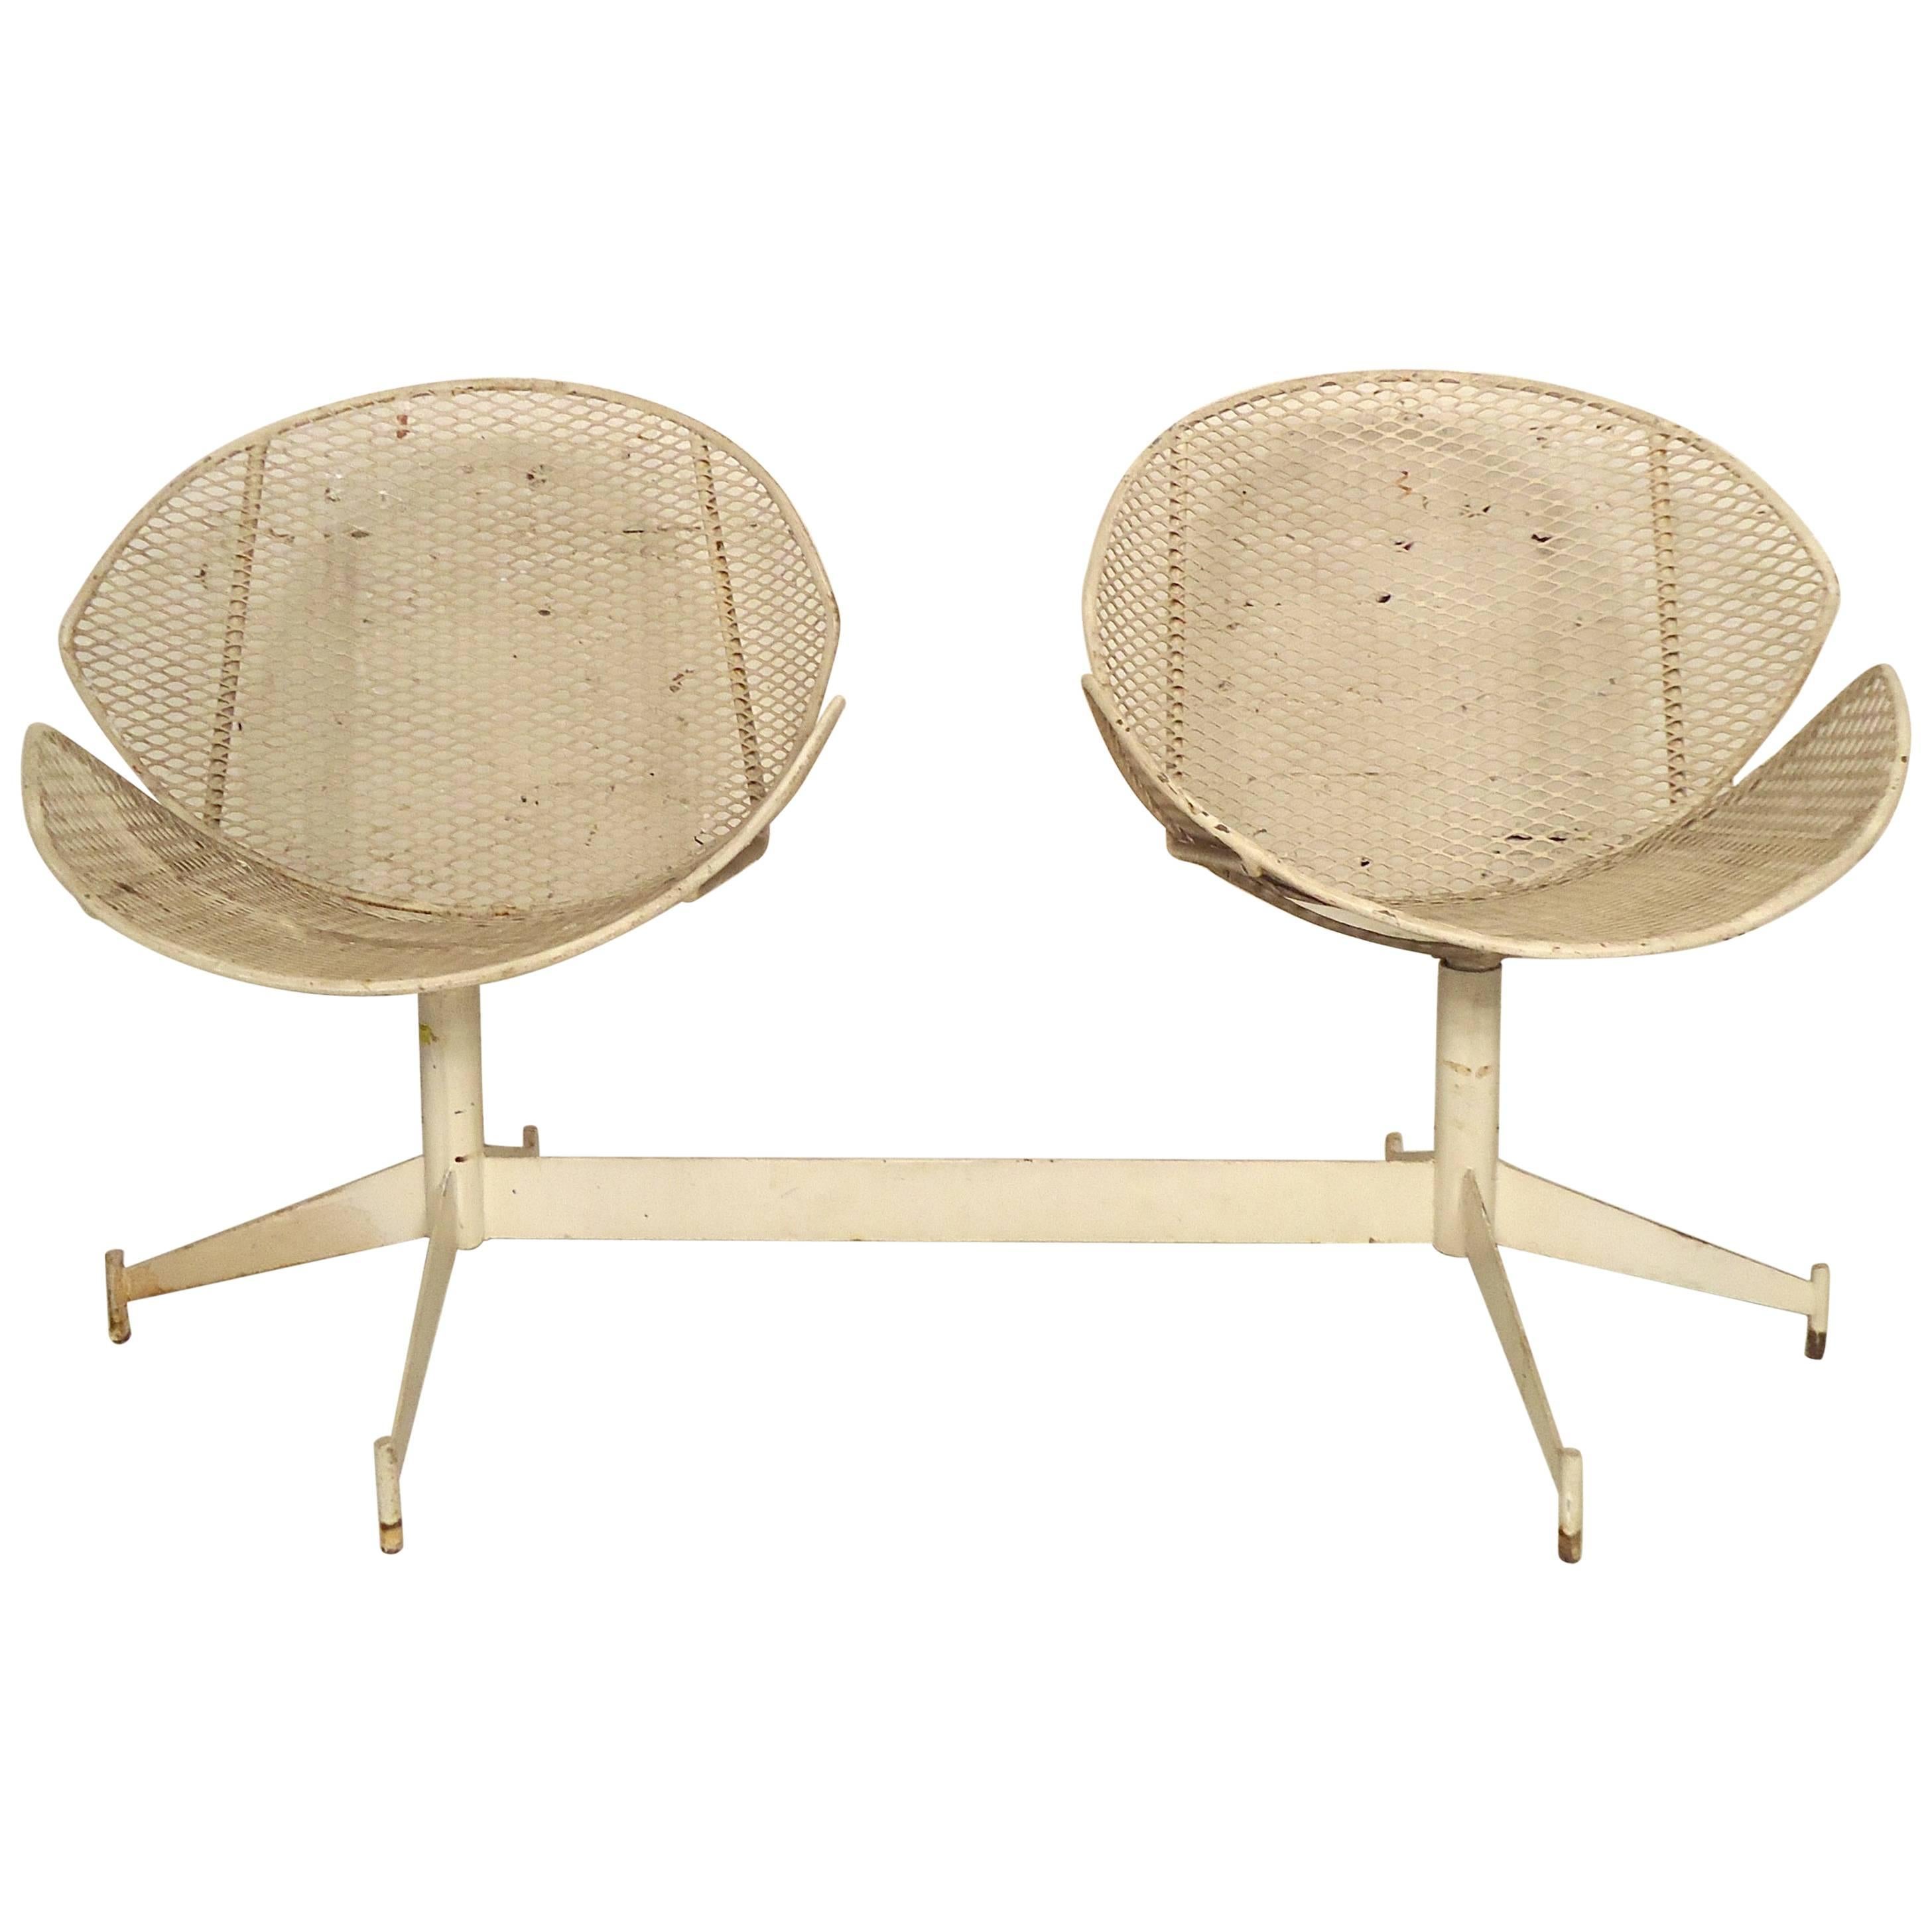 Maurizio Tempestini Double Chair Outdoor Seating